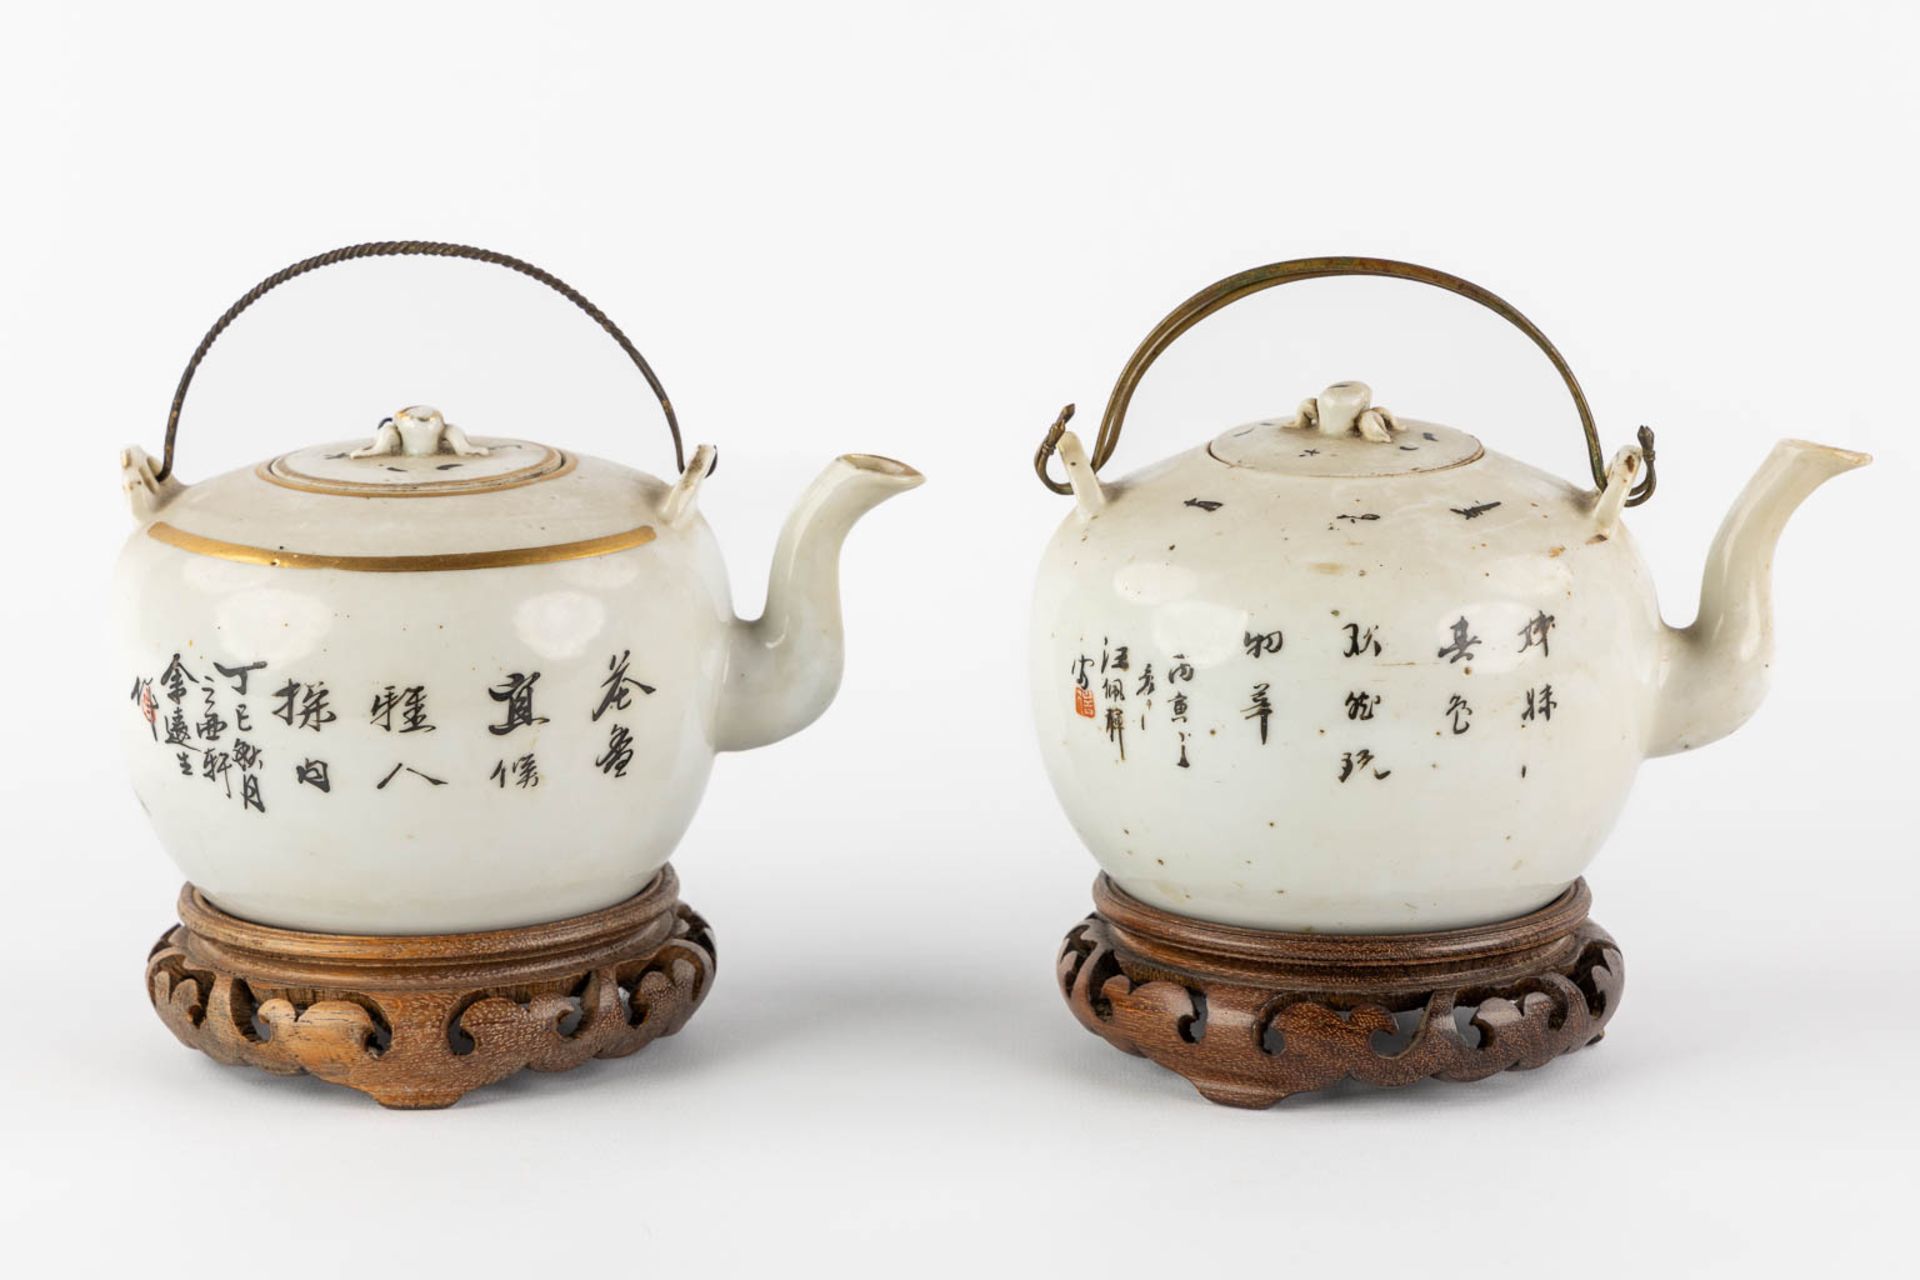 Two Chinese teapots, decorated with figurines. (L:13 x W:17,5 x H:10 cm) - Bild 5 aus 14